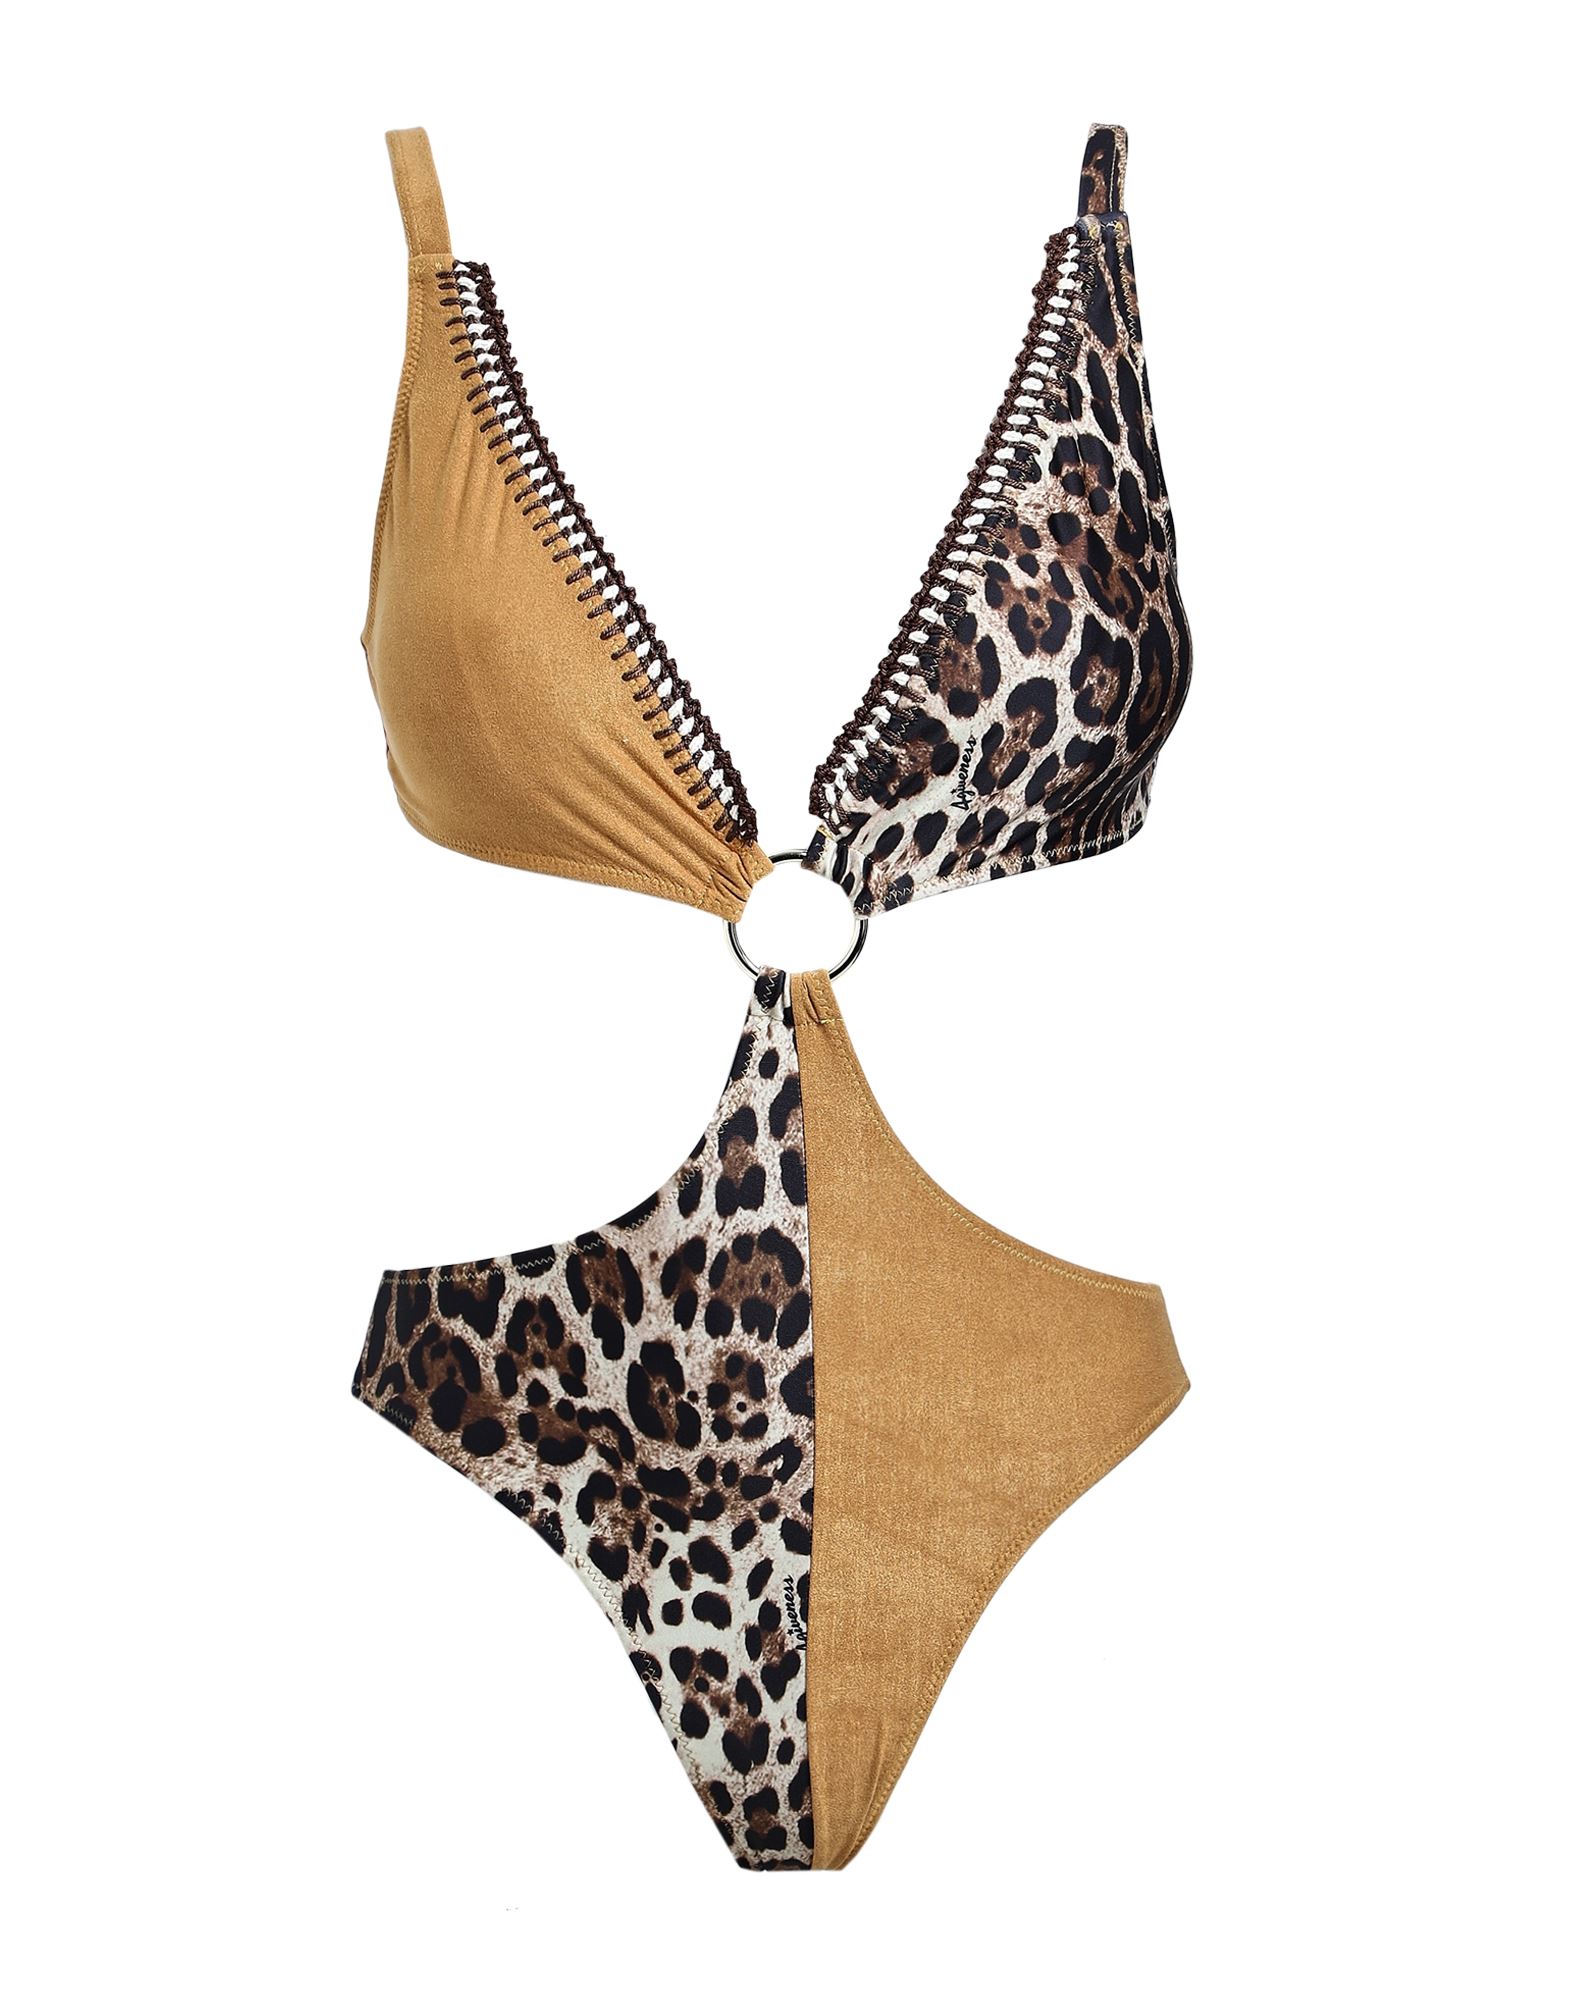 4giveness One-piece Swimsuits In Beige